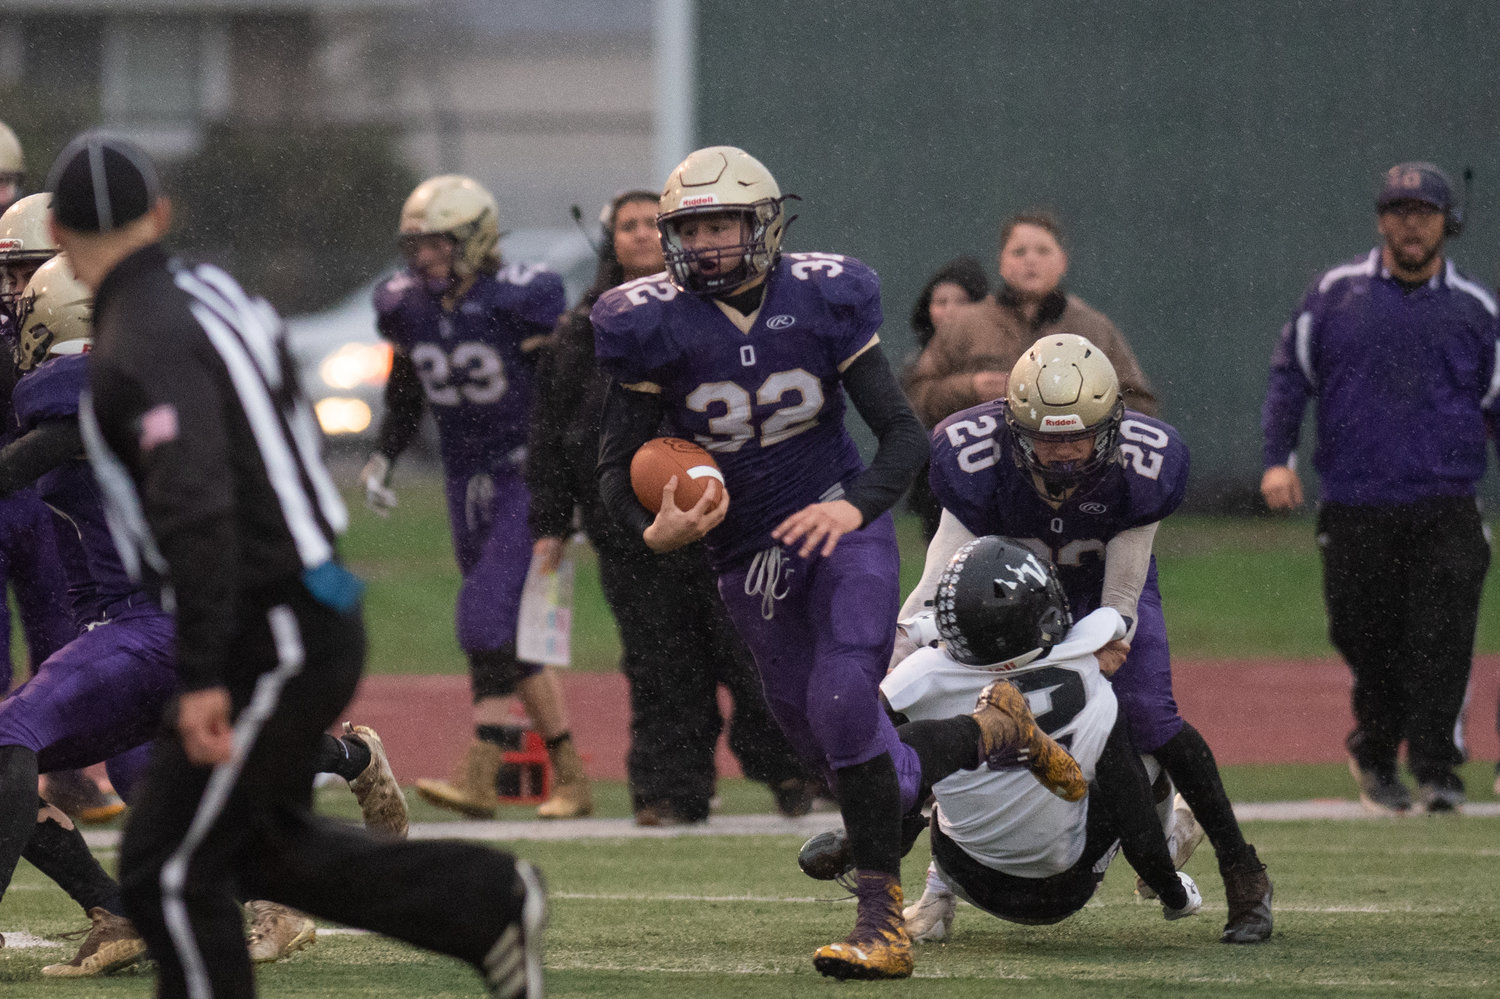 Onalaska fullback Marshall Haight takes a pitch to the house against River View in the opening round of the 2B state tournament Nov. 13 at Centralia Tigers Stadium.